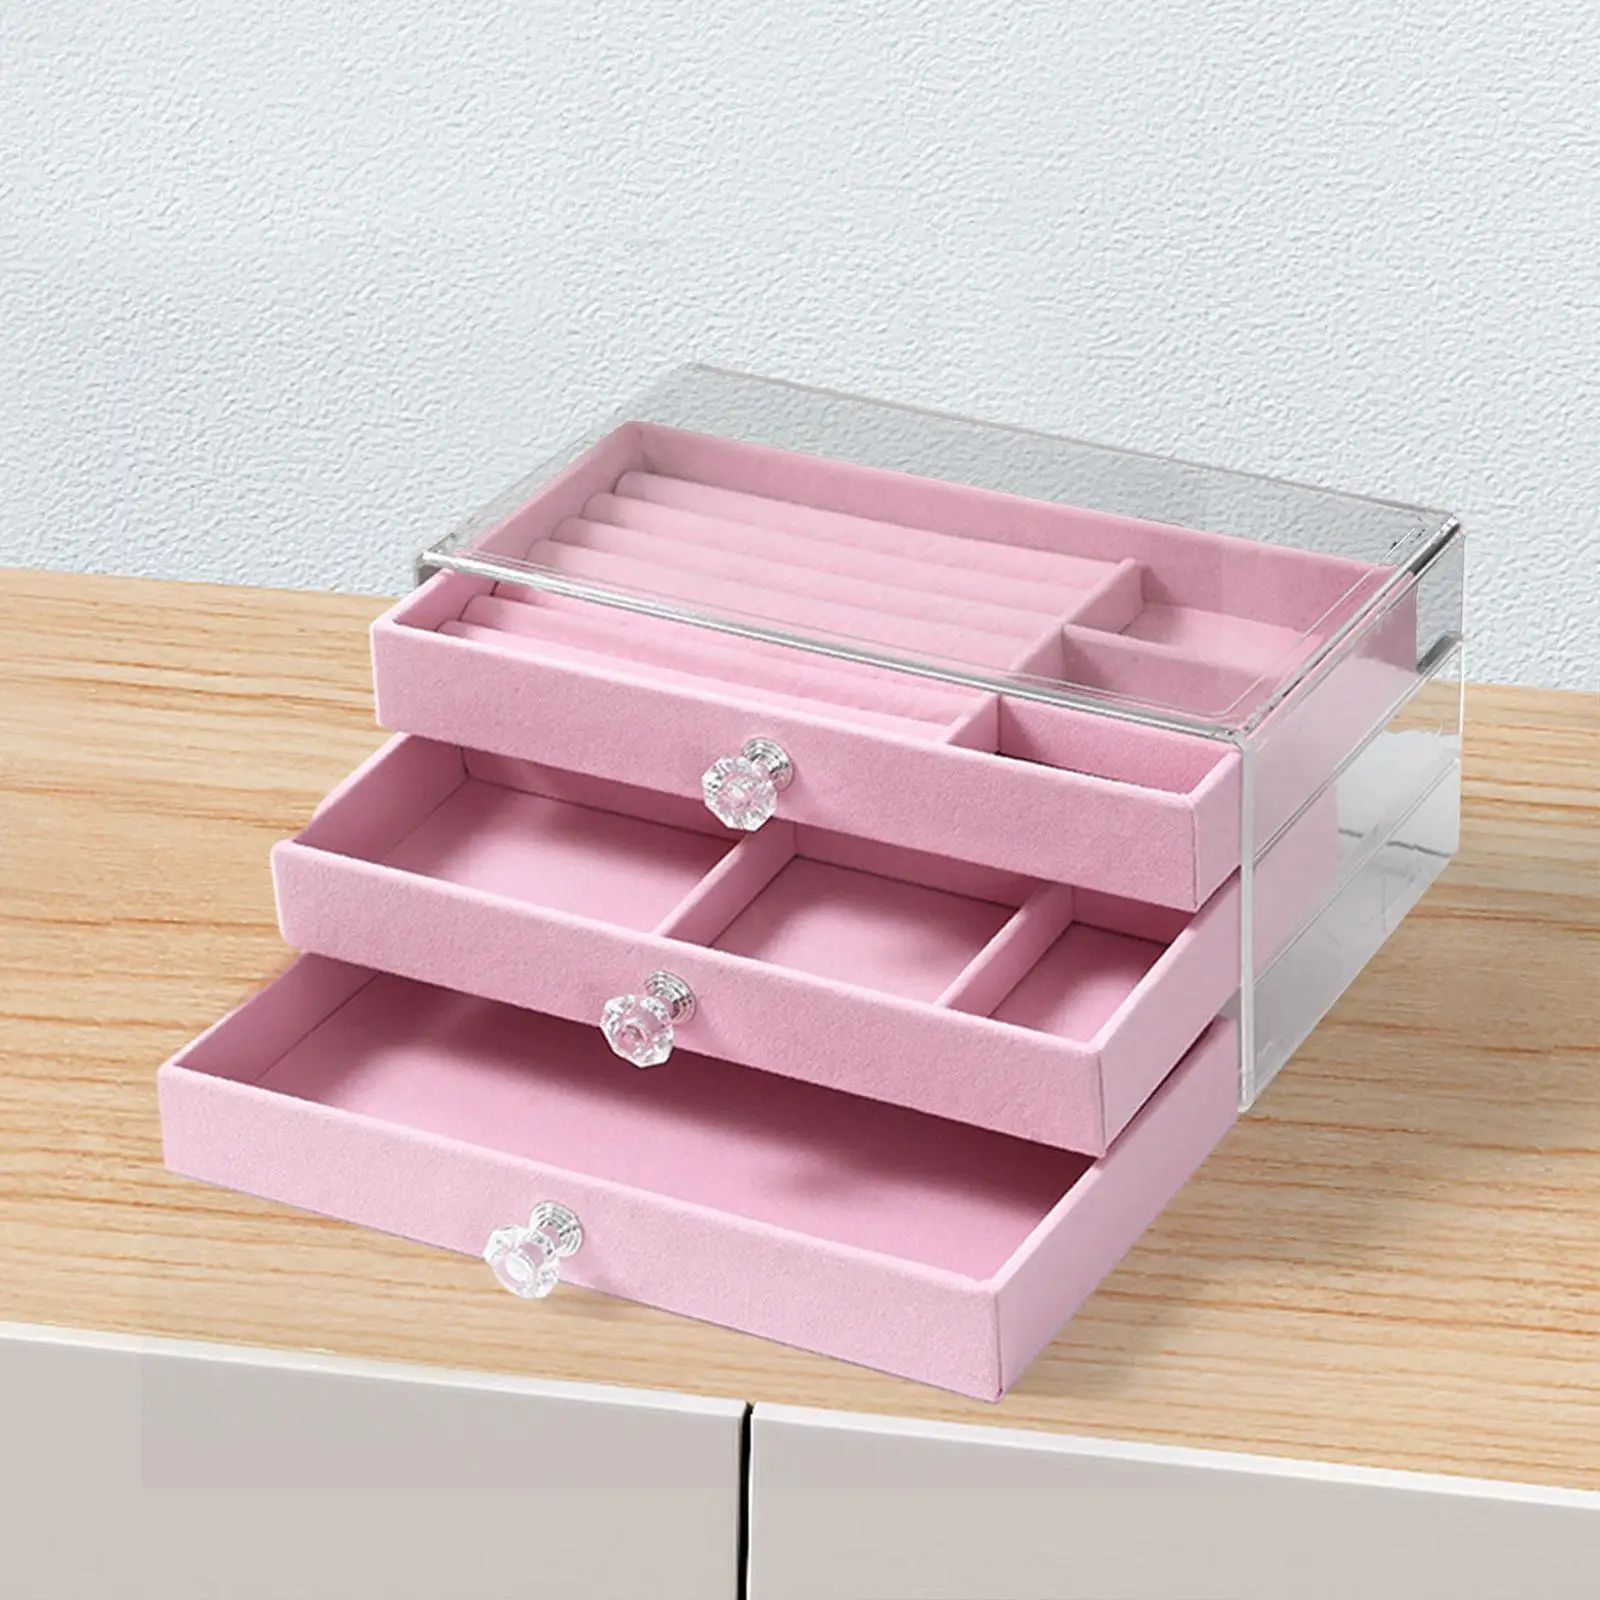 Portable Jewelry Box Acrylic Mirrored Rings Earrings Velvet Lined 3 Layer Jewelry Storage Box for Friends, Wife or Mother Gift